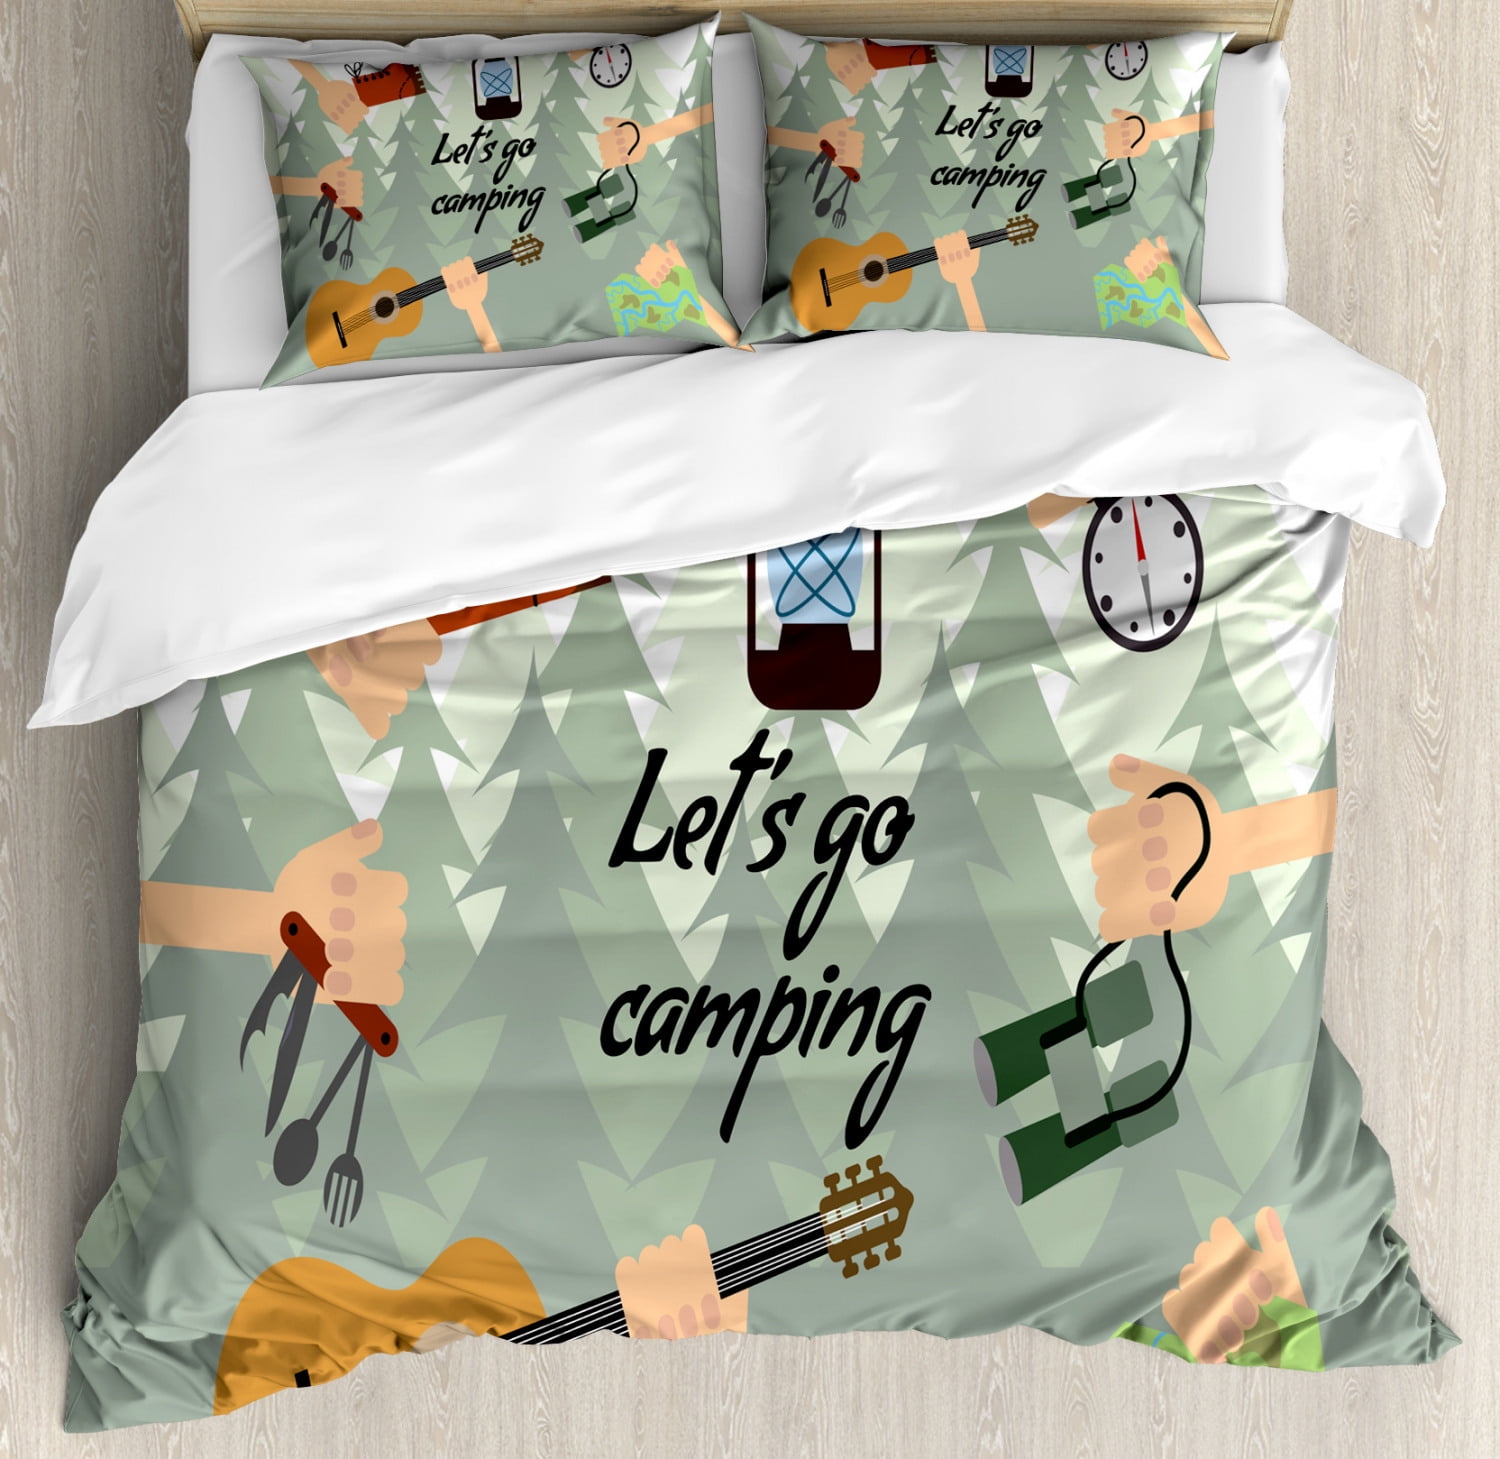 Camping Rv Caravan Boho Art Quilt Bedding Set Blanket Quilts with Pillowcase Cover Soft Comfortable for Kids Parents Us Twin Queen King Size